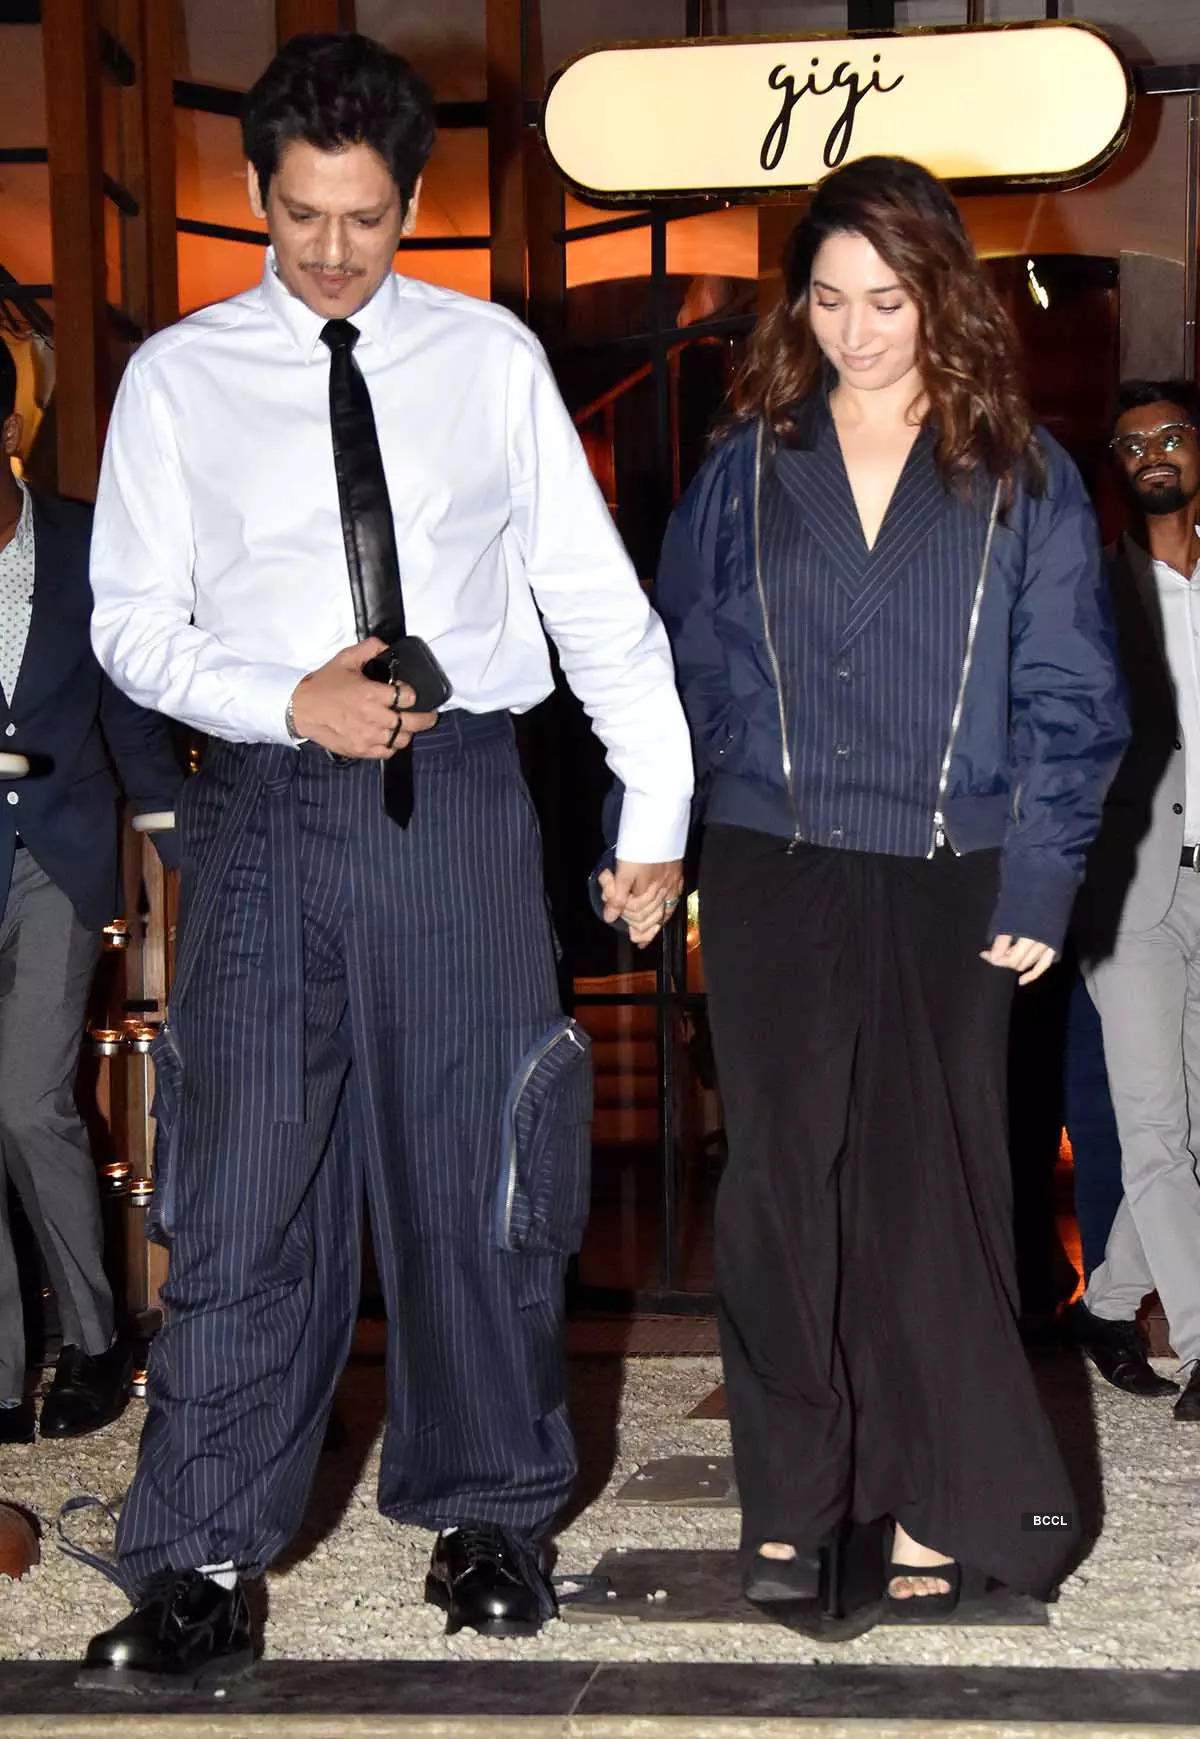 Vijay Varma and Tamannaah Bhatia, hand-in-hand, step out for a cosy dinner date